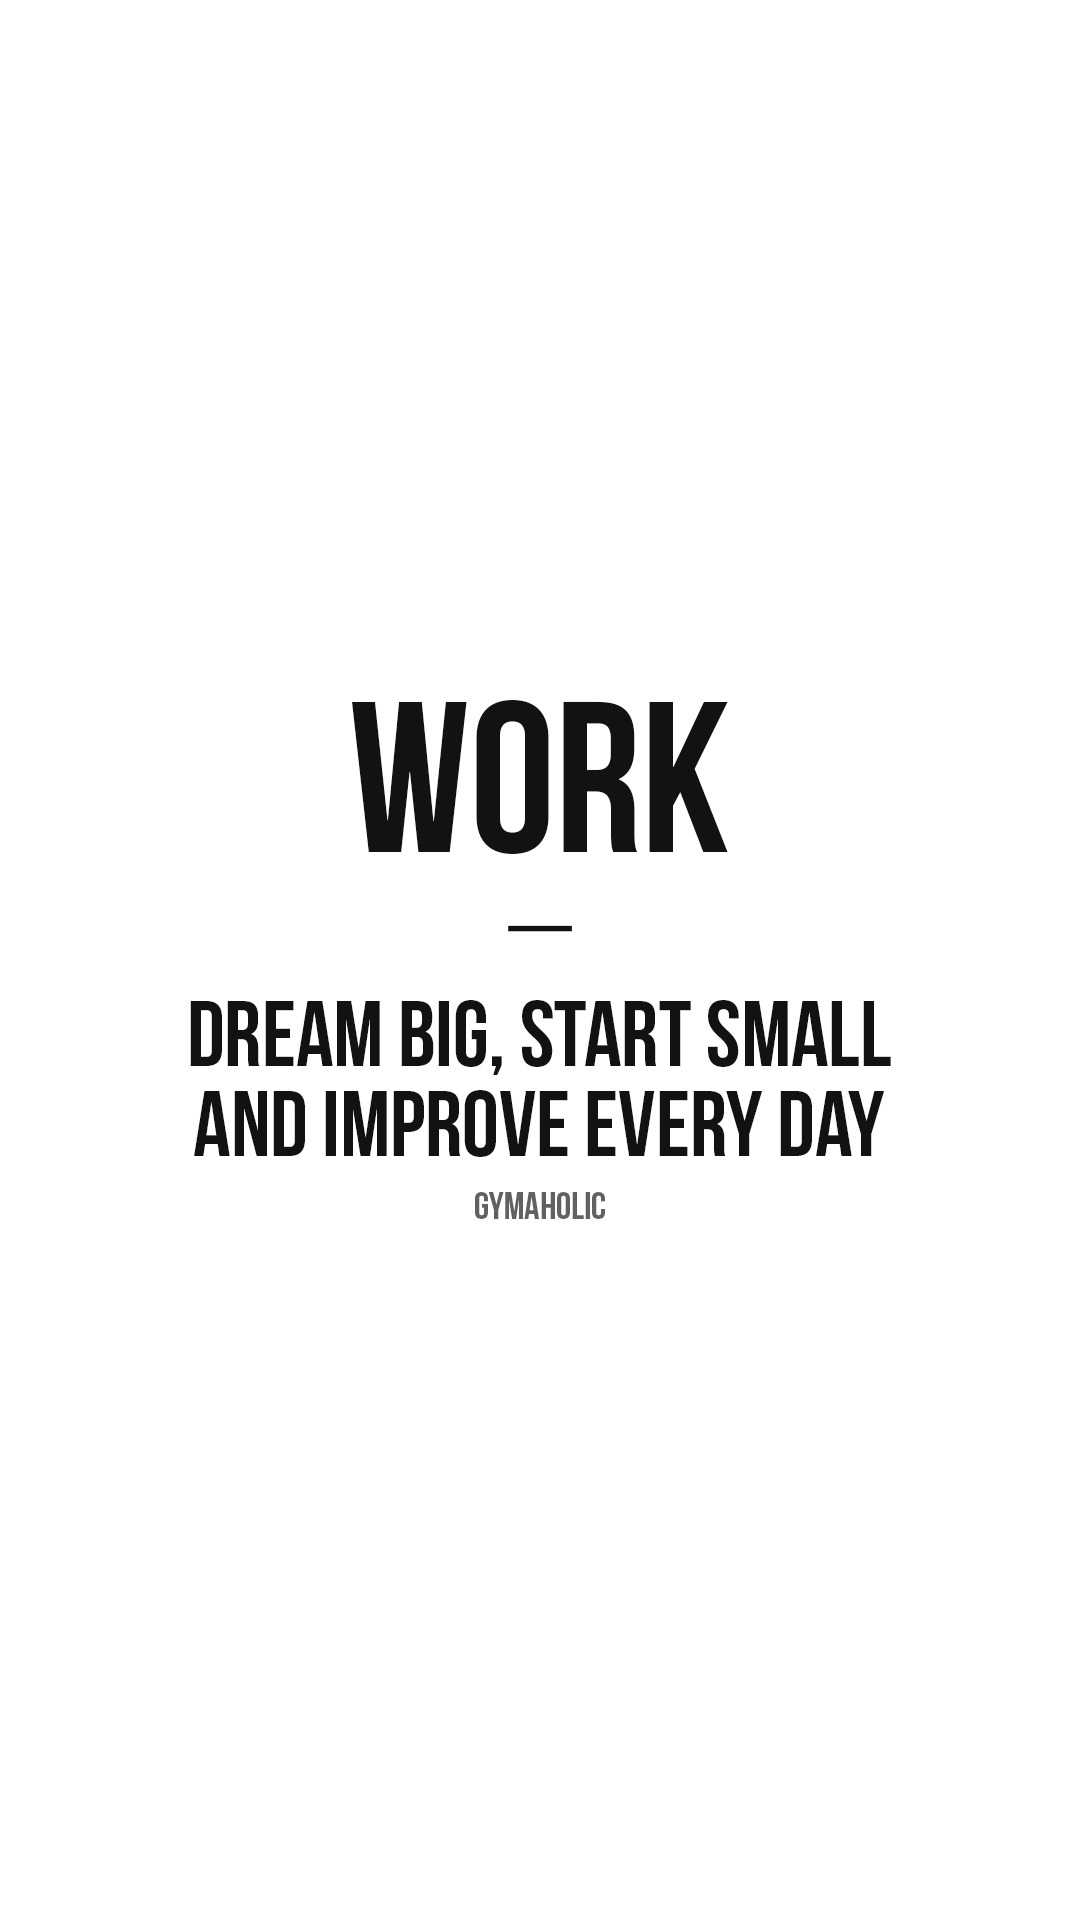 Work: dream big, start small and improve every day